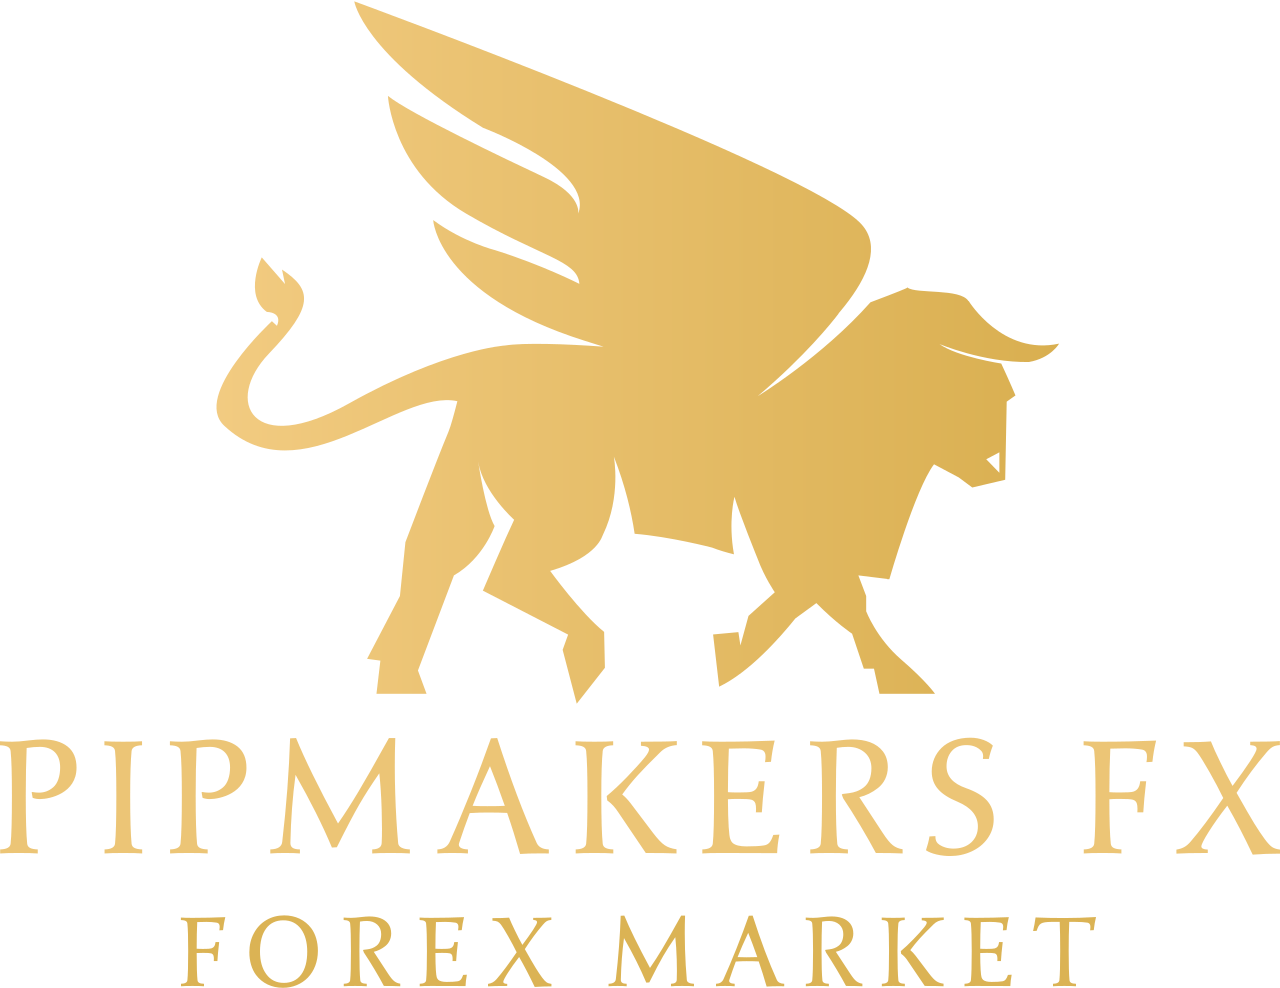 PipMakers FX's logo